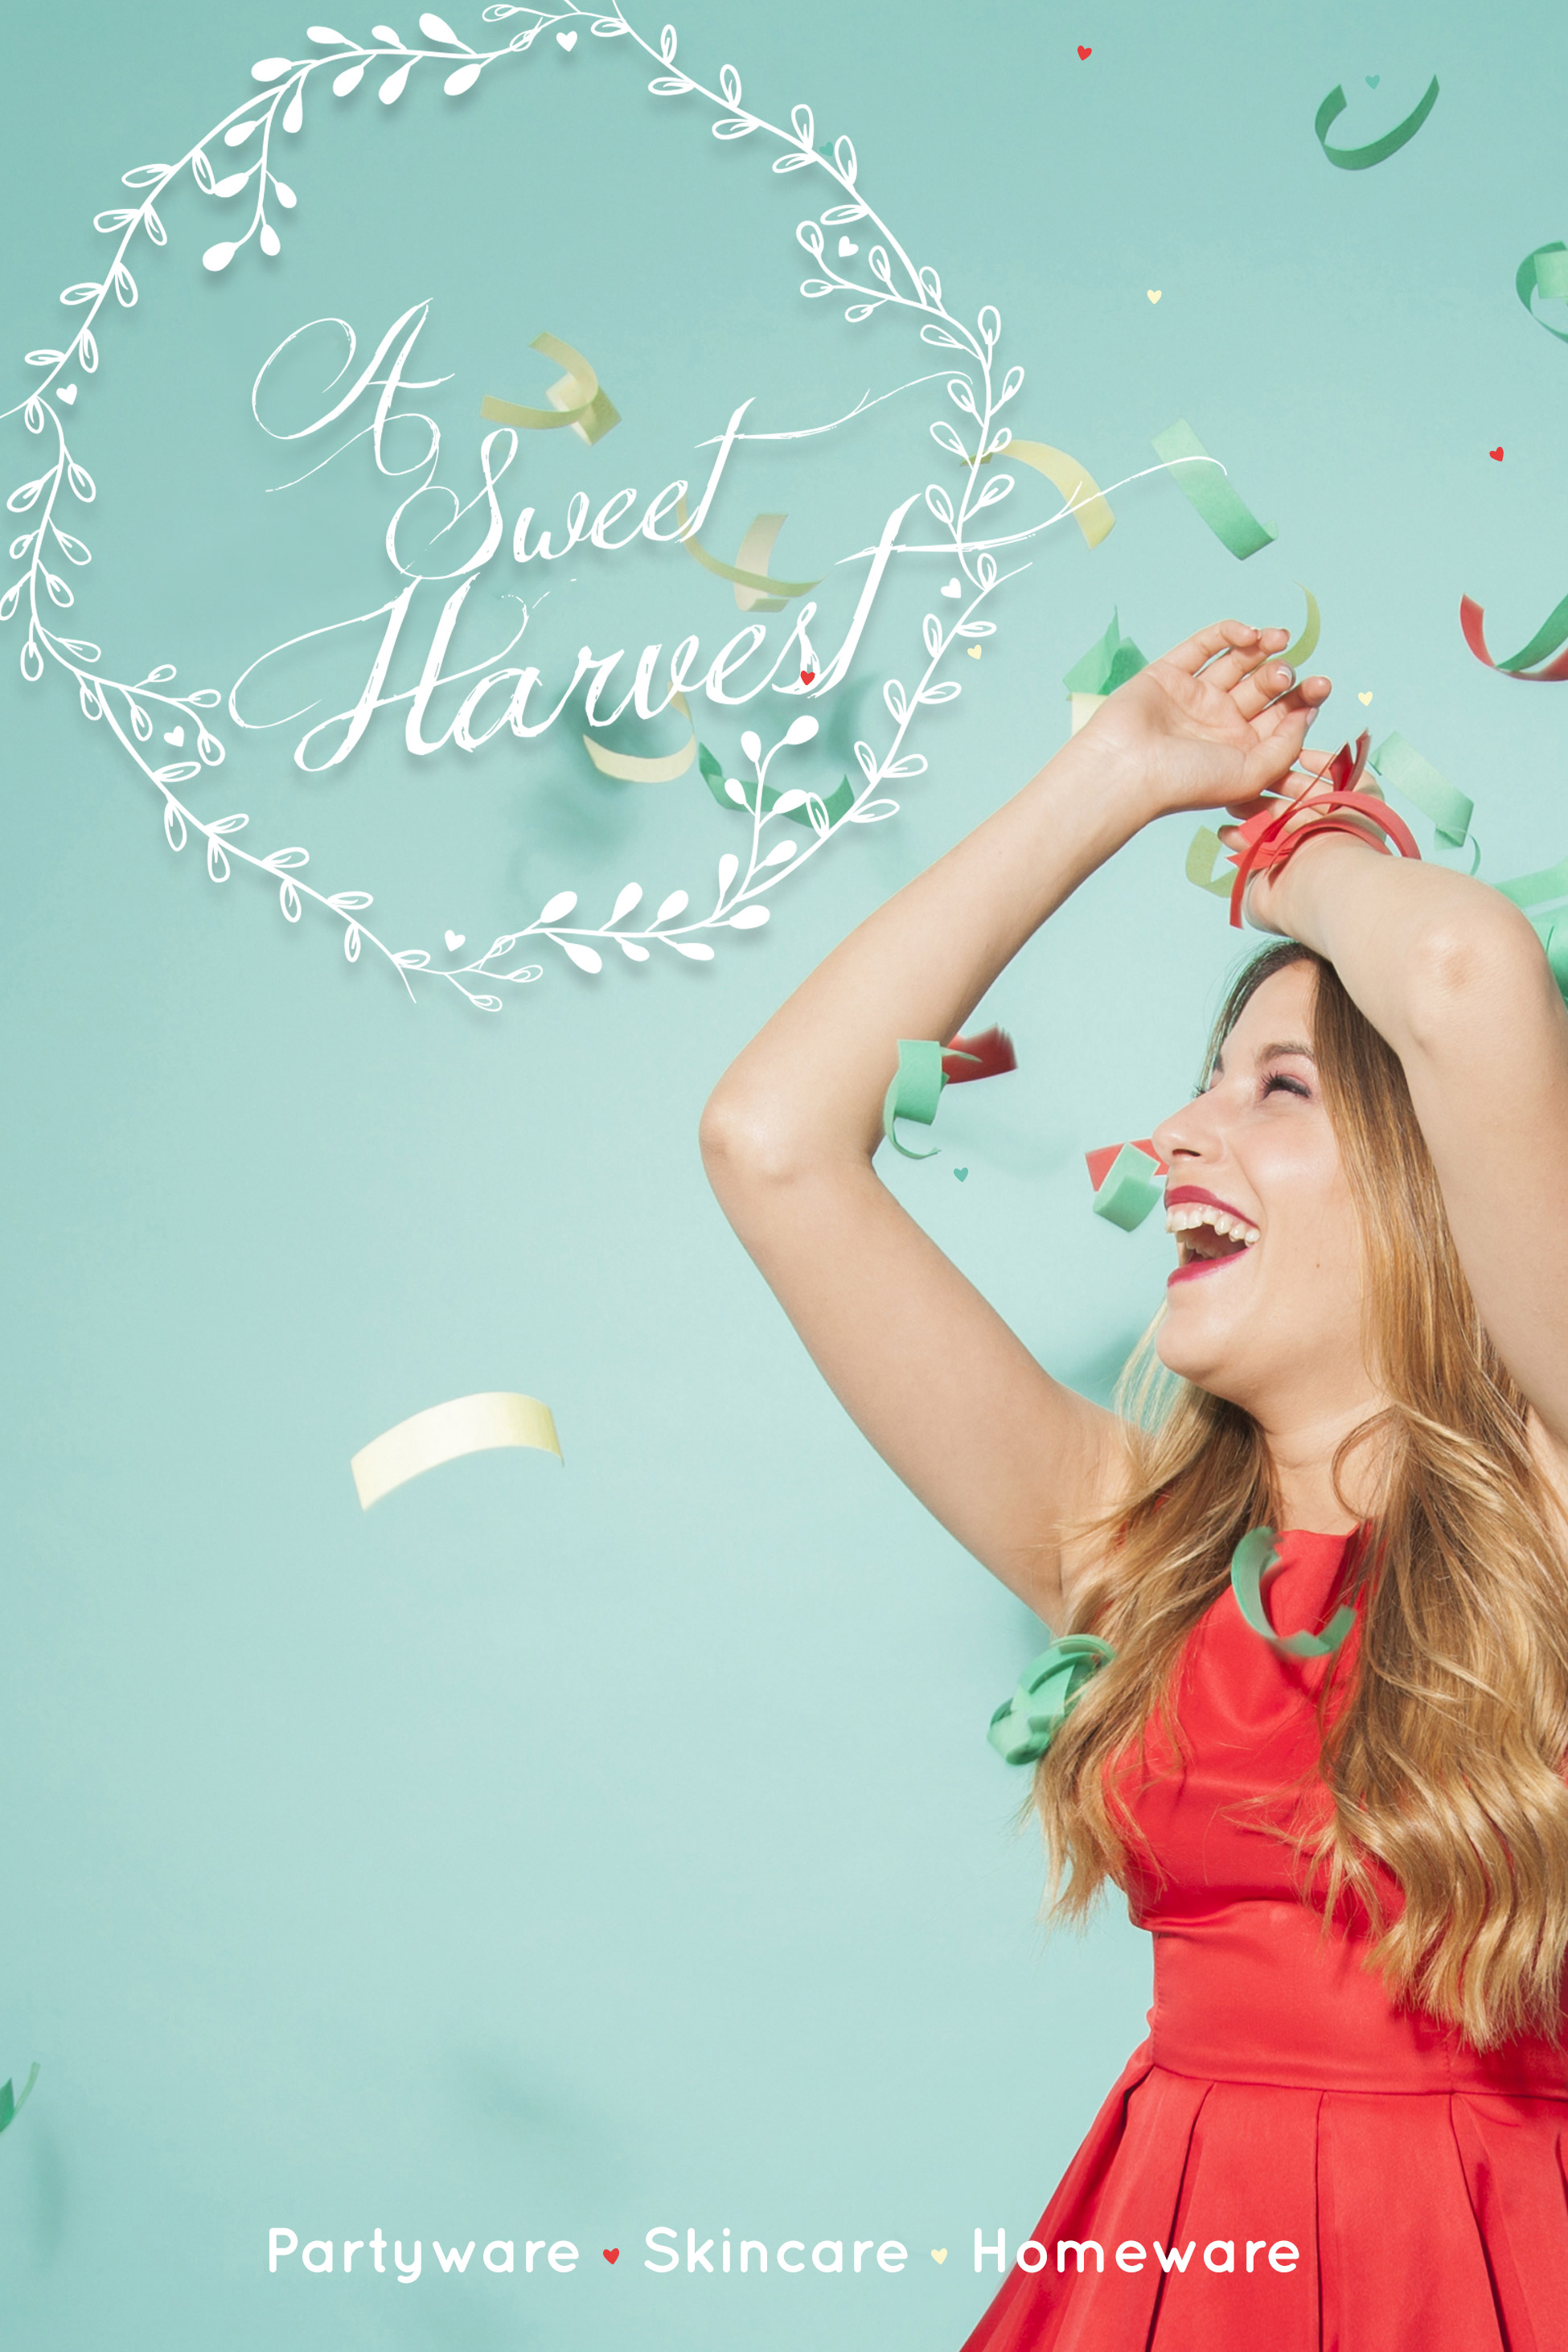 A Sweet Harvest - Corporate Identity